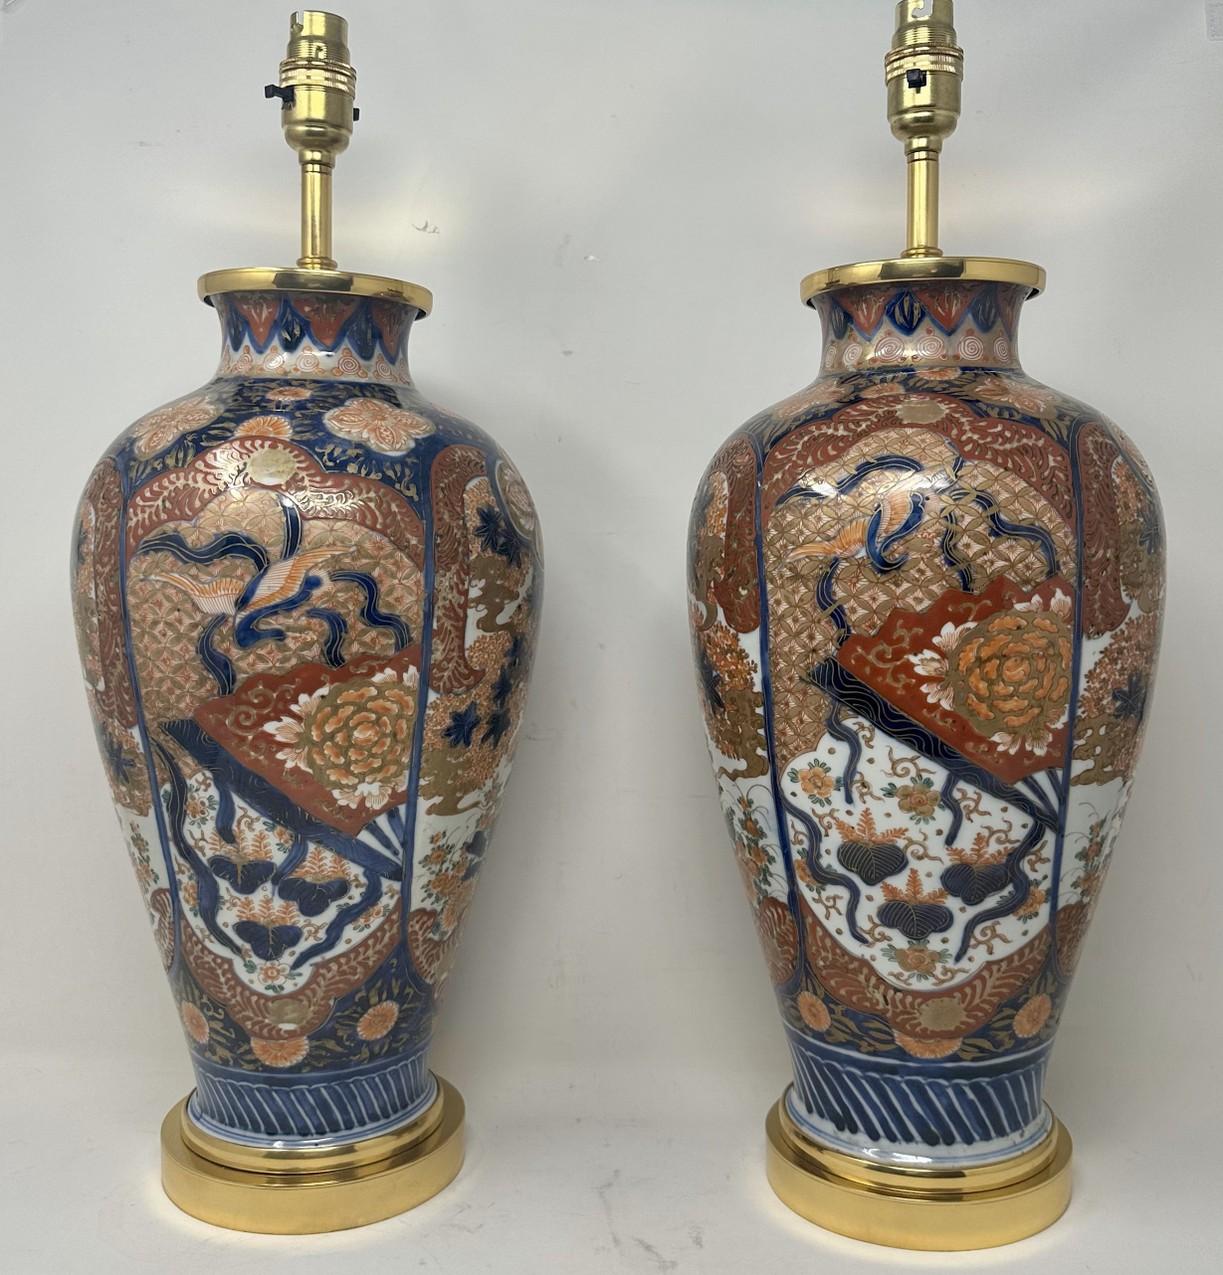 Stunning Pair Traditional Japanese Imari Bulbous Form Porcelain Vases of inverted baluster form with flared necks and of quite large proportions, now converted to a pair of electric Table Lamps, complete with ormolu stepped circular bases and later